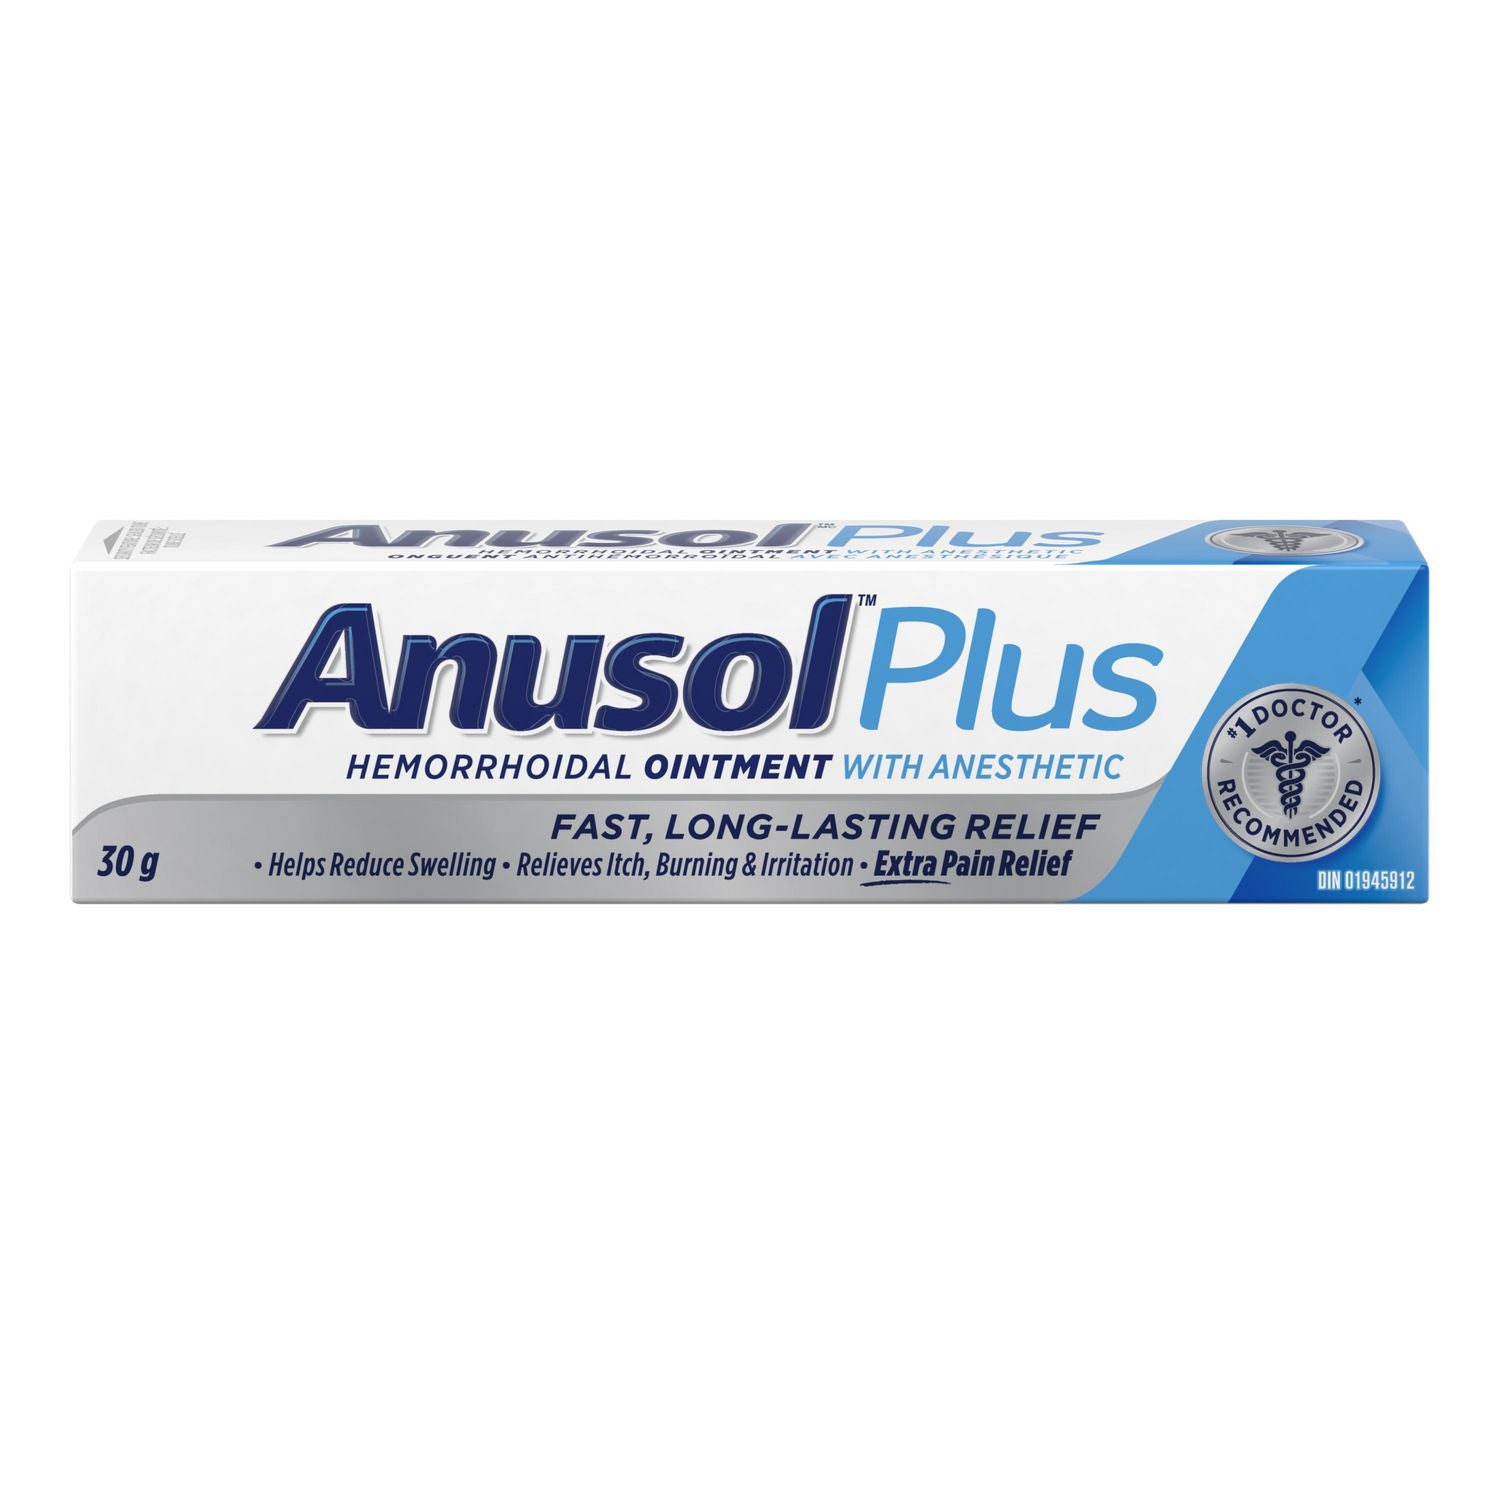 Anusol Plus Hemorrhoidal Ointment with Anesthetic 30g